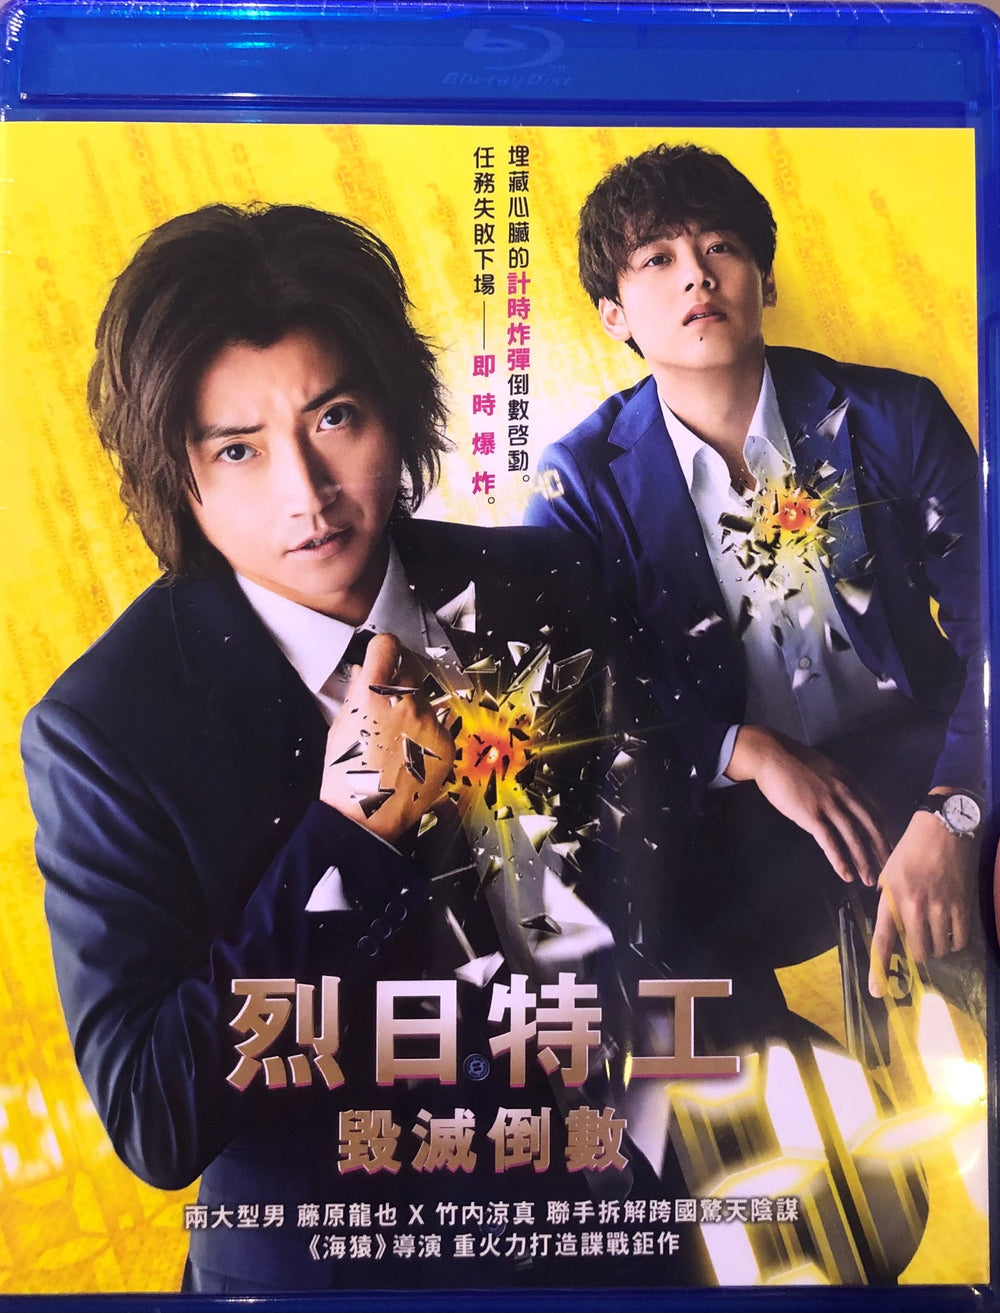 The  Sun Stands Still 烈日特工 : 毀滅倒數 2021 (Japanese Movie) BLU-RAY with English Sub (Region A)